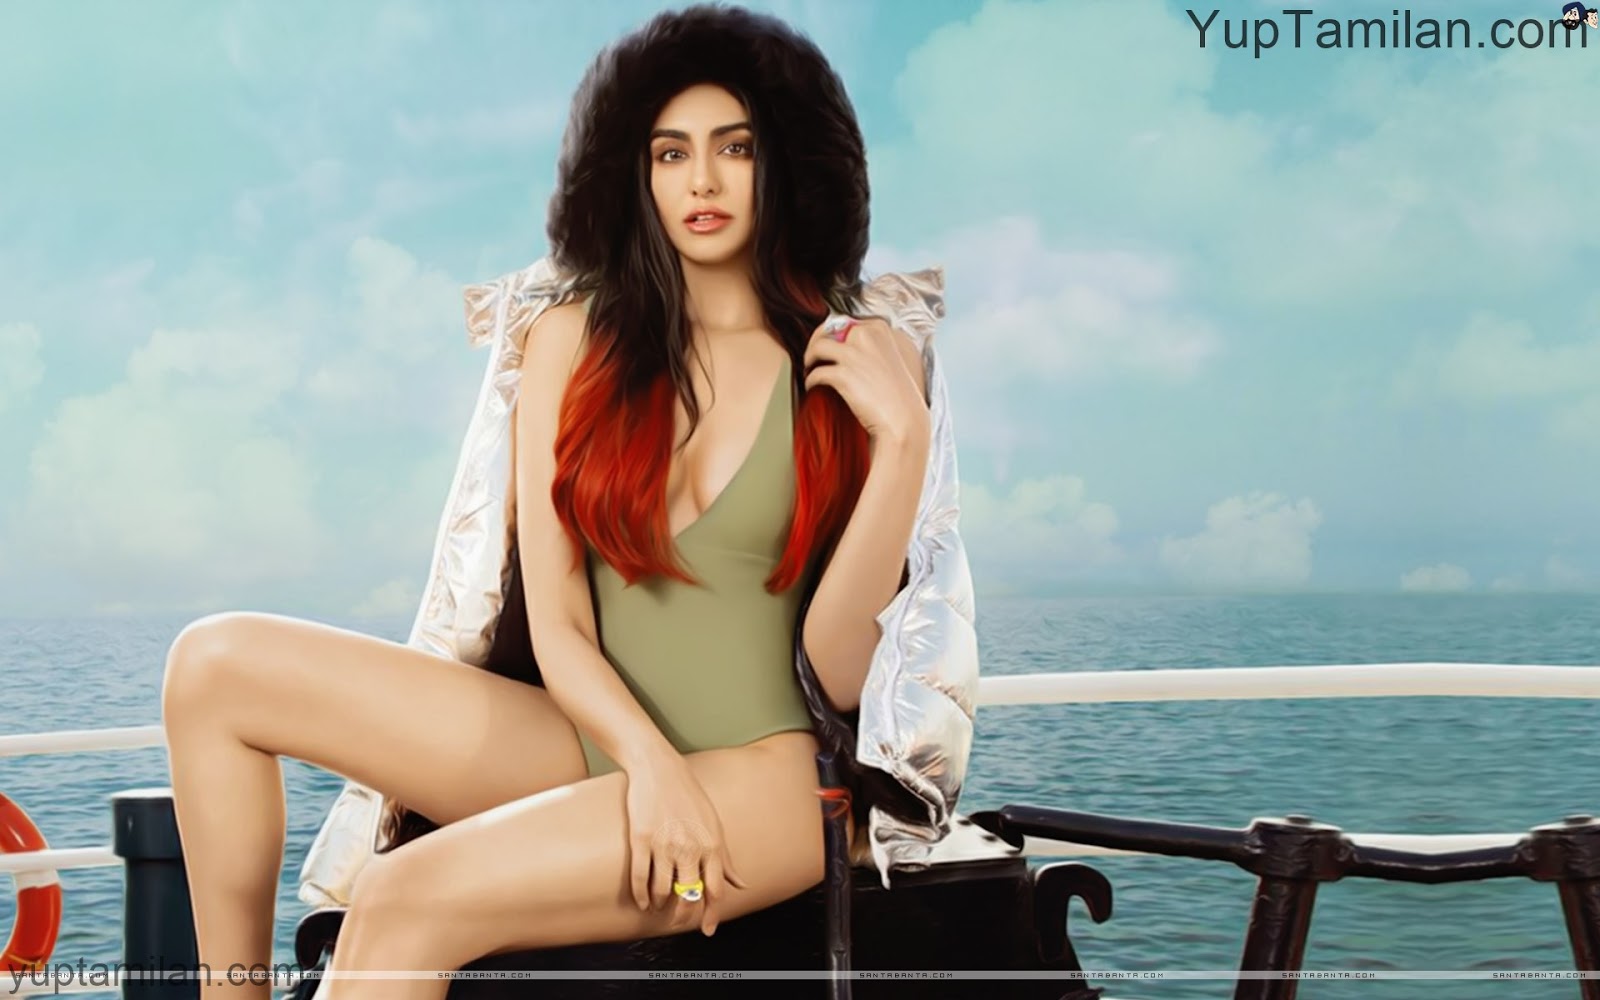 Adah Sharma 40 Hd Wallpapers Sexiest Photo Collection